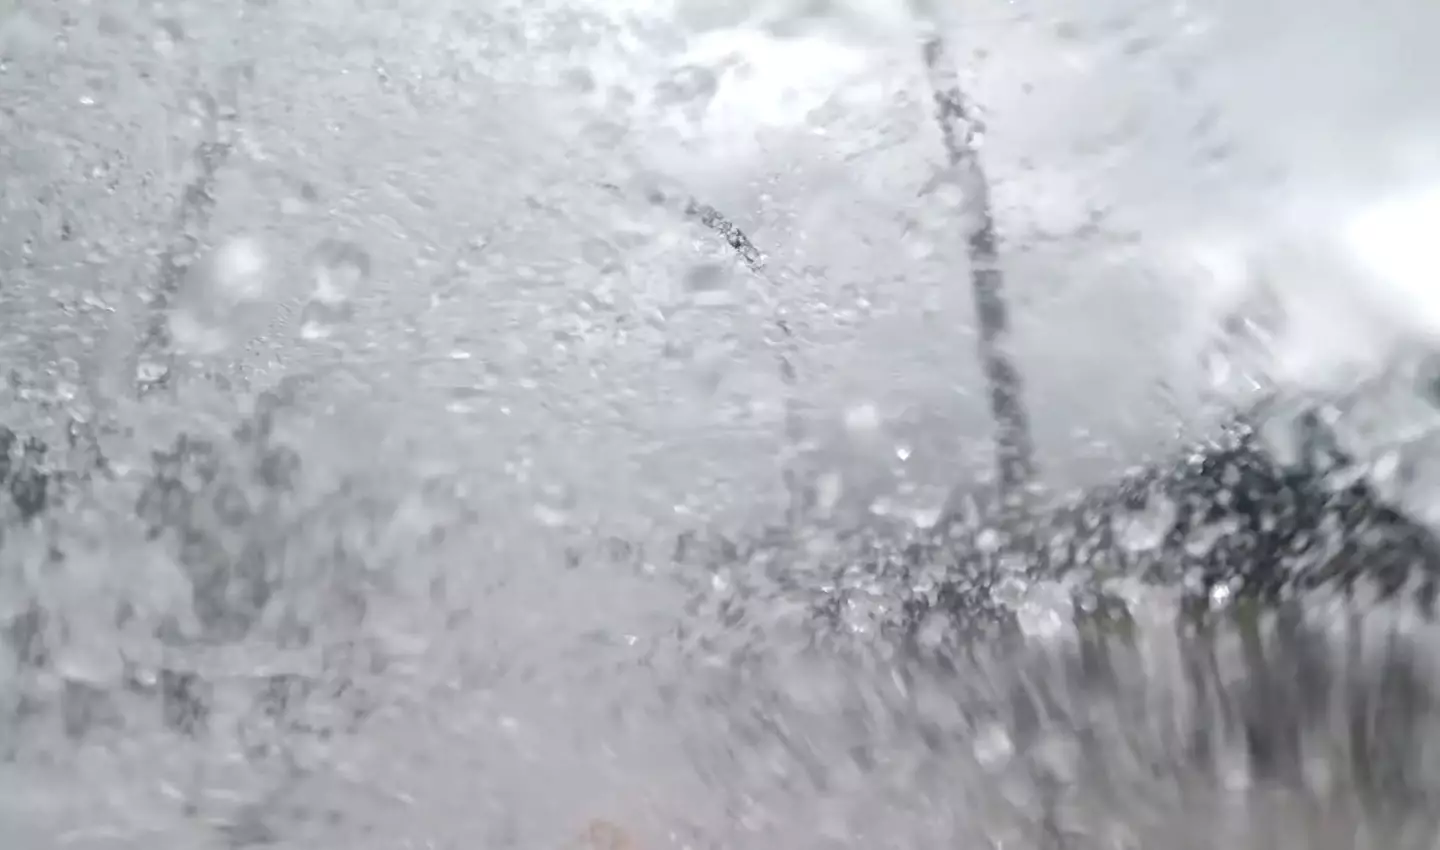 His camera might be a bit waterlogged by the looks of things (YouTube/TurboSlides)